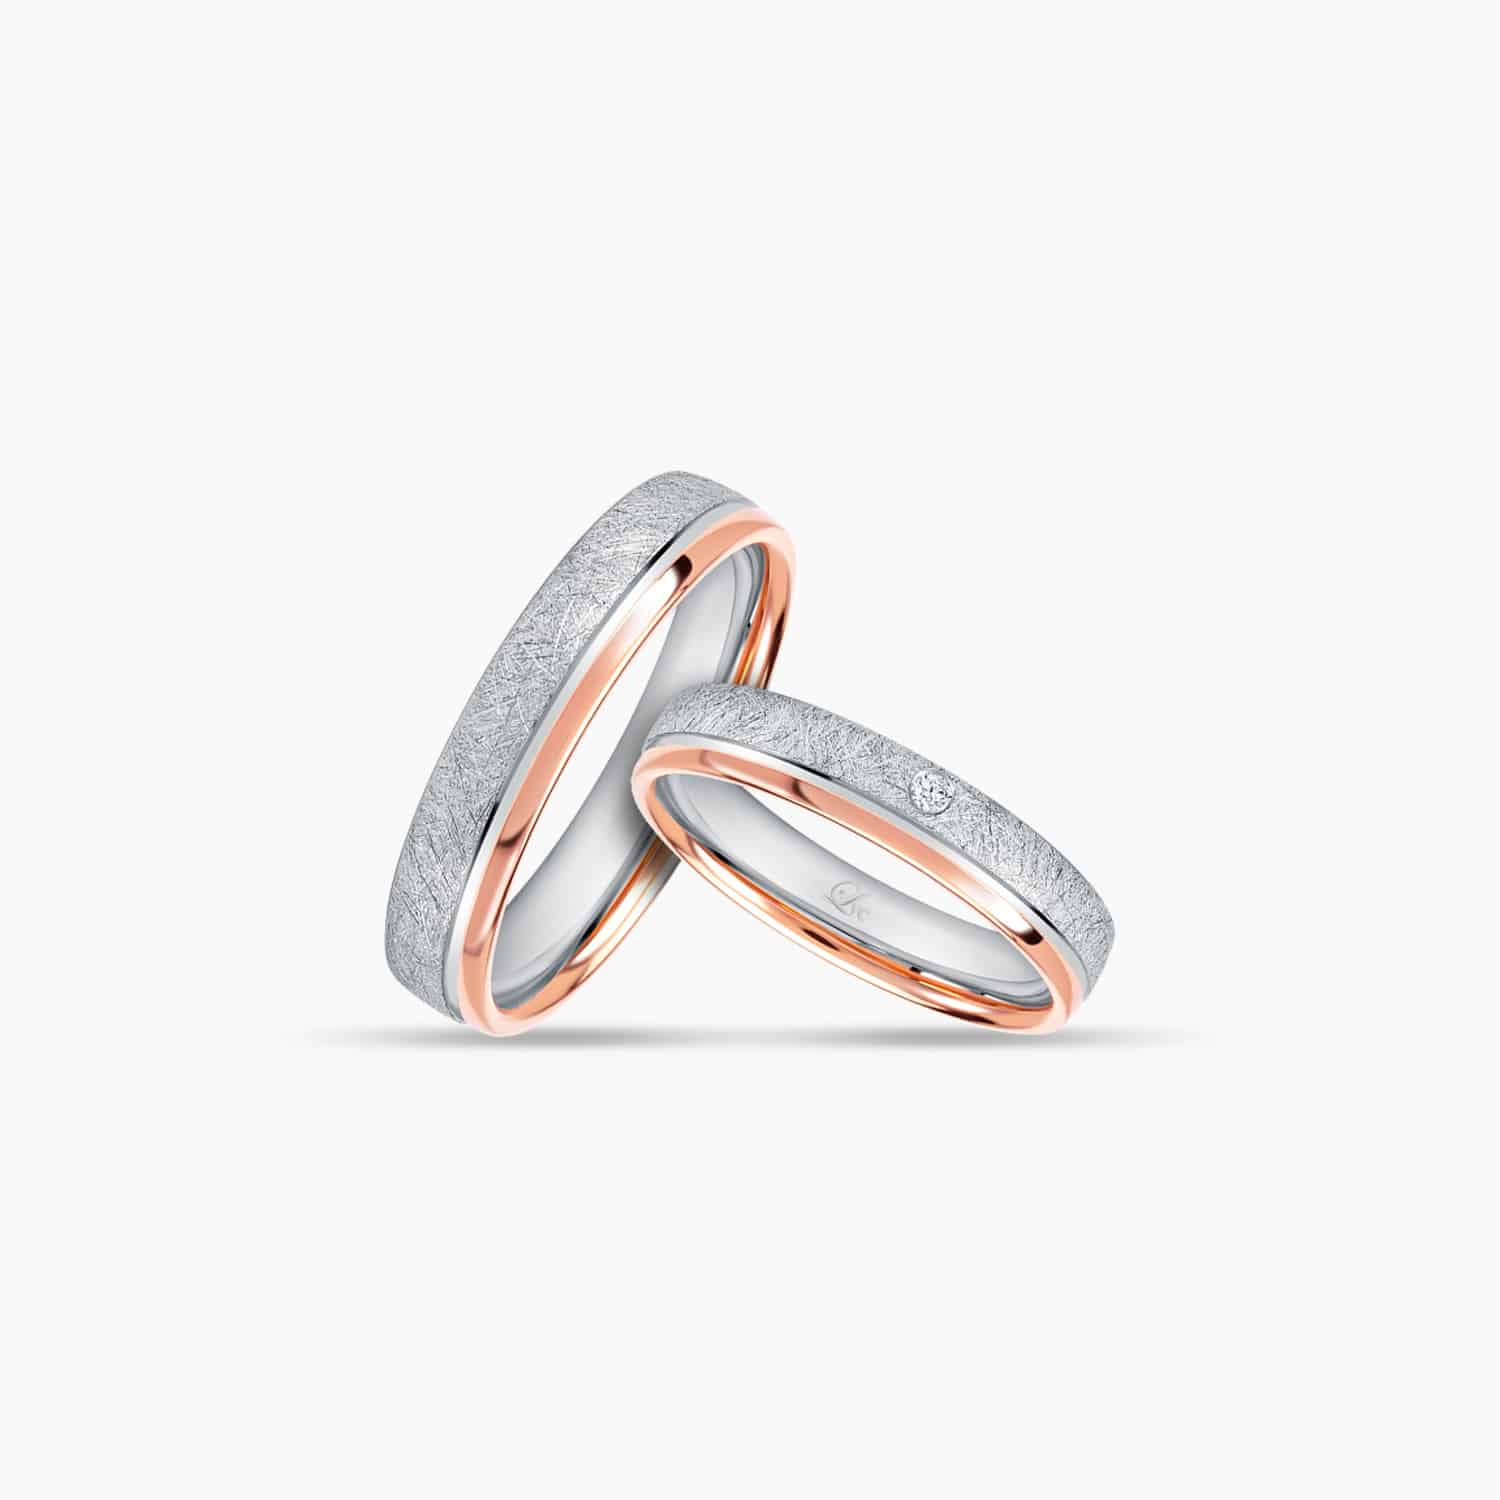 LVC SOLEIL WEDDING BAND IN DUAL MATTE AND GLOSSY FINISH a set of wedding bands in white and rose gold with matte and glossy finish and diamonds 钻石 戒指 cincin diamond